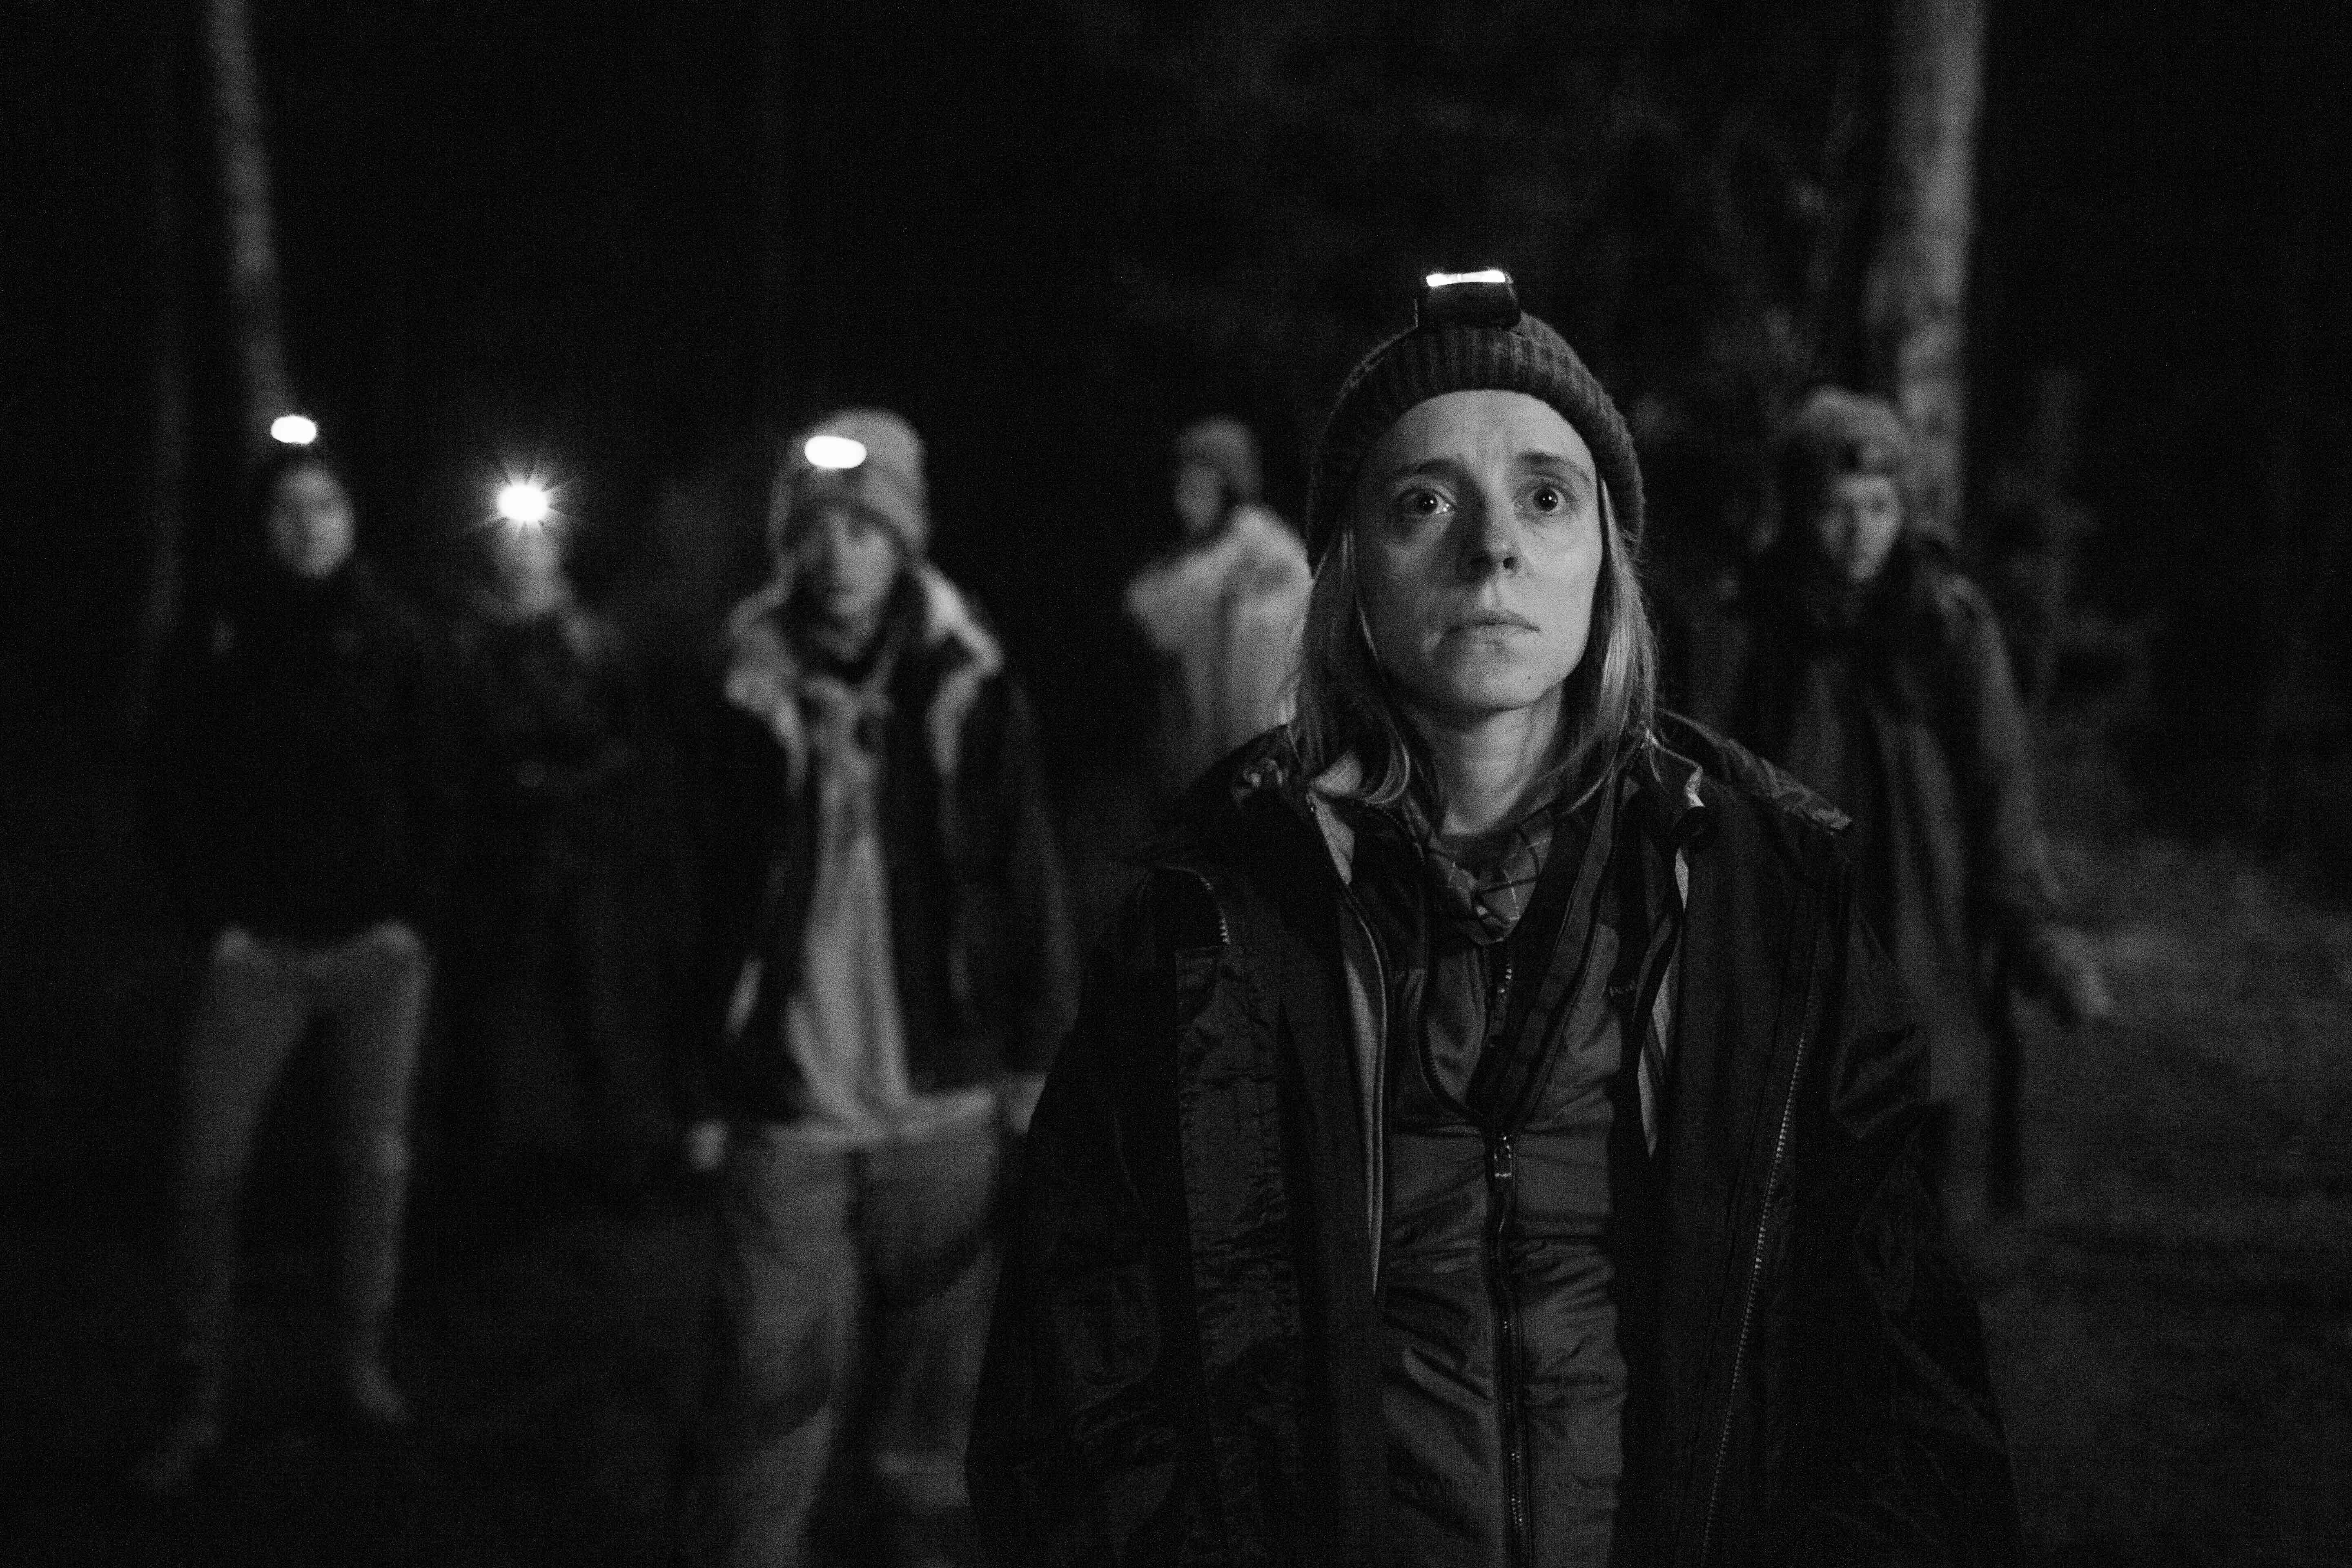 She made an honest movie about Poland's migrant crisis. That's when her problems began